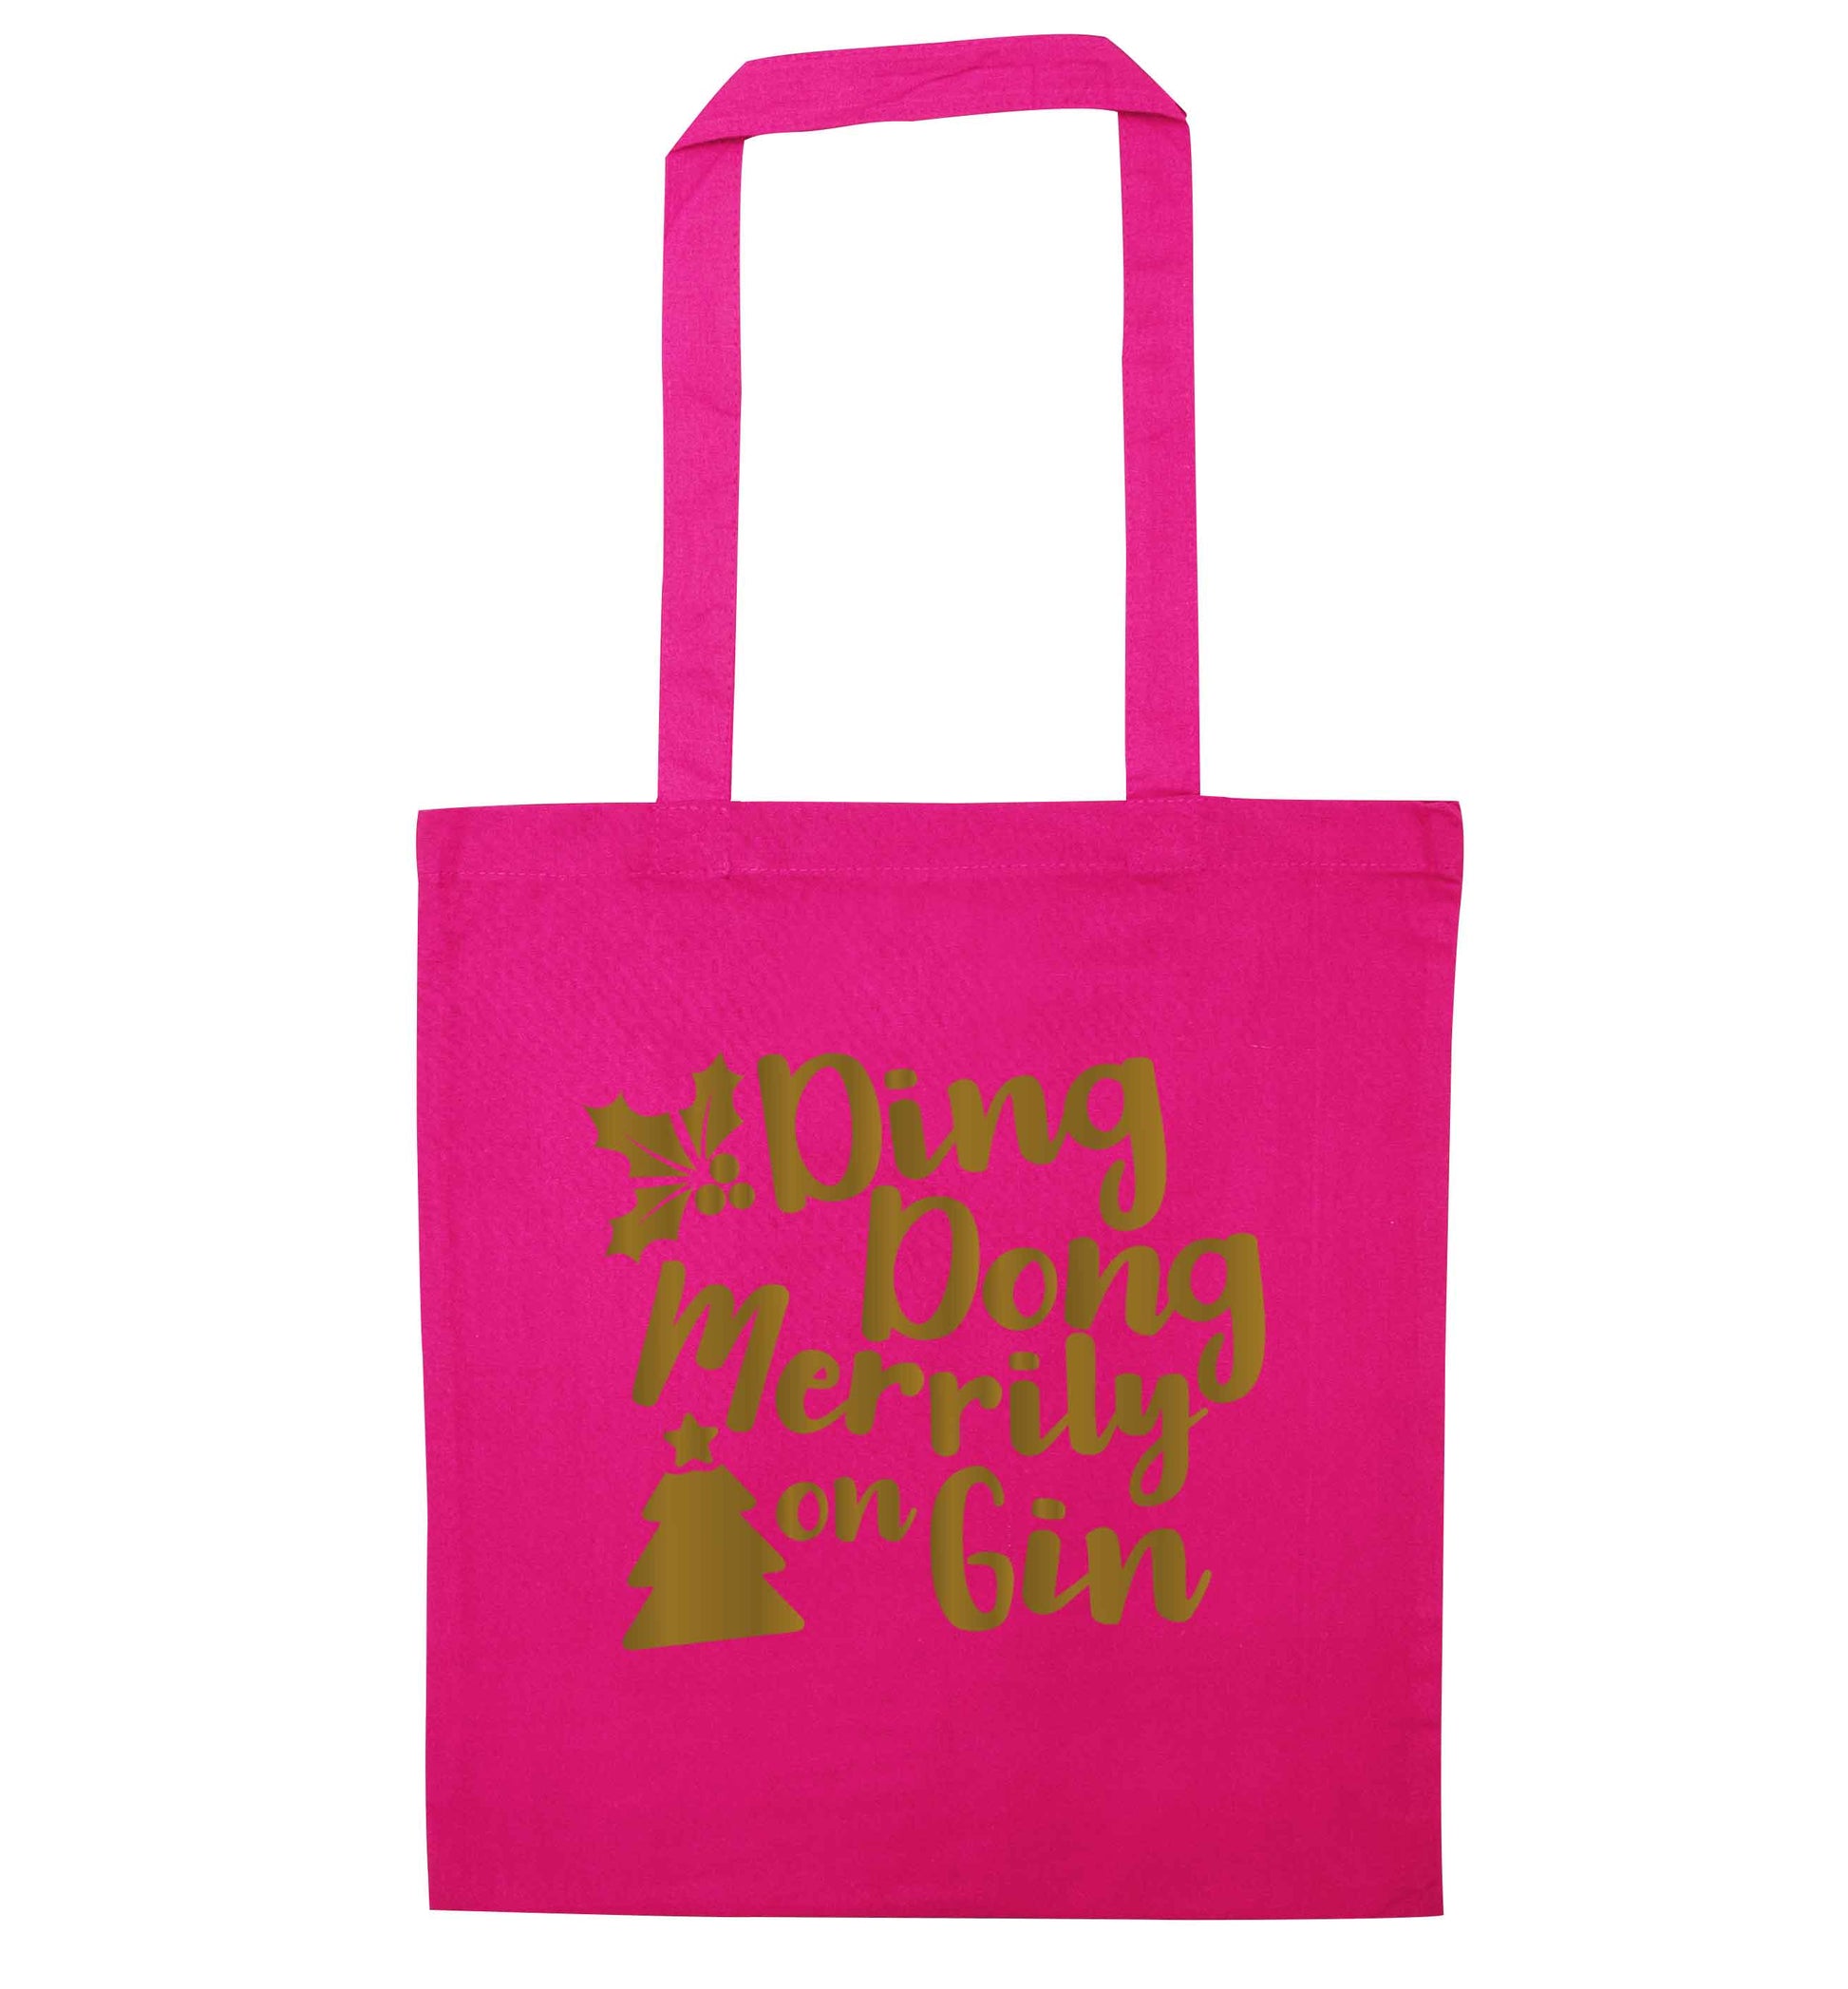 Ding dong merrily on gin pink tote bag